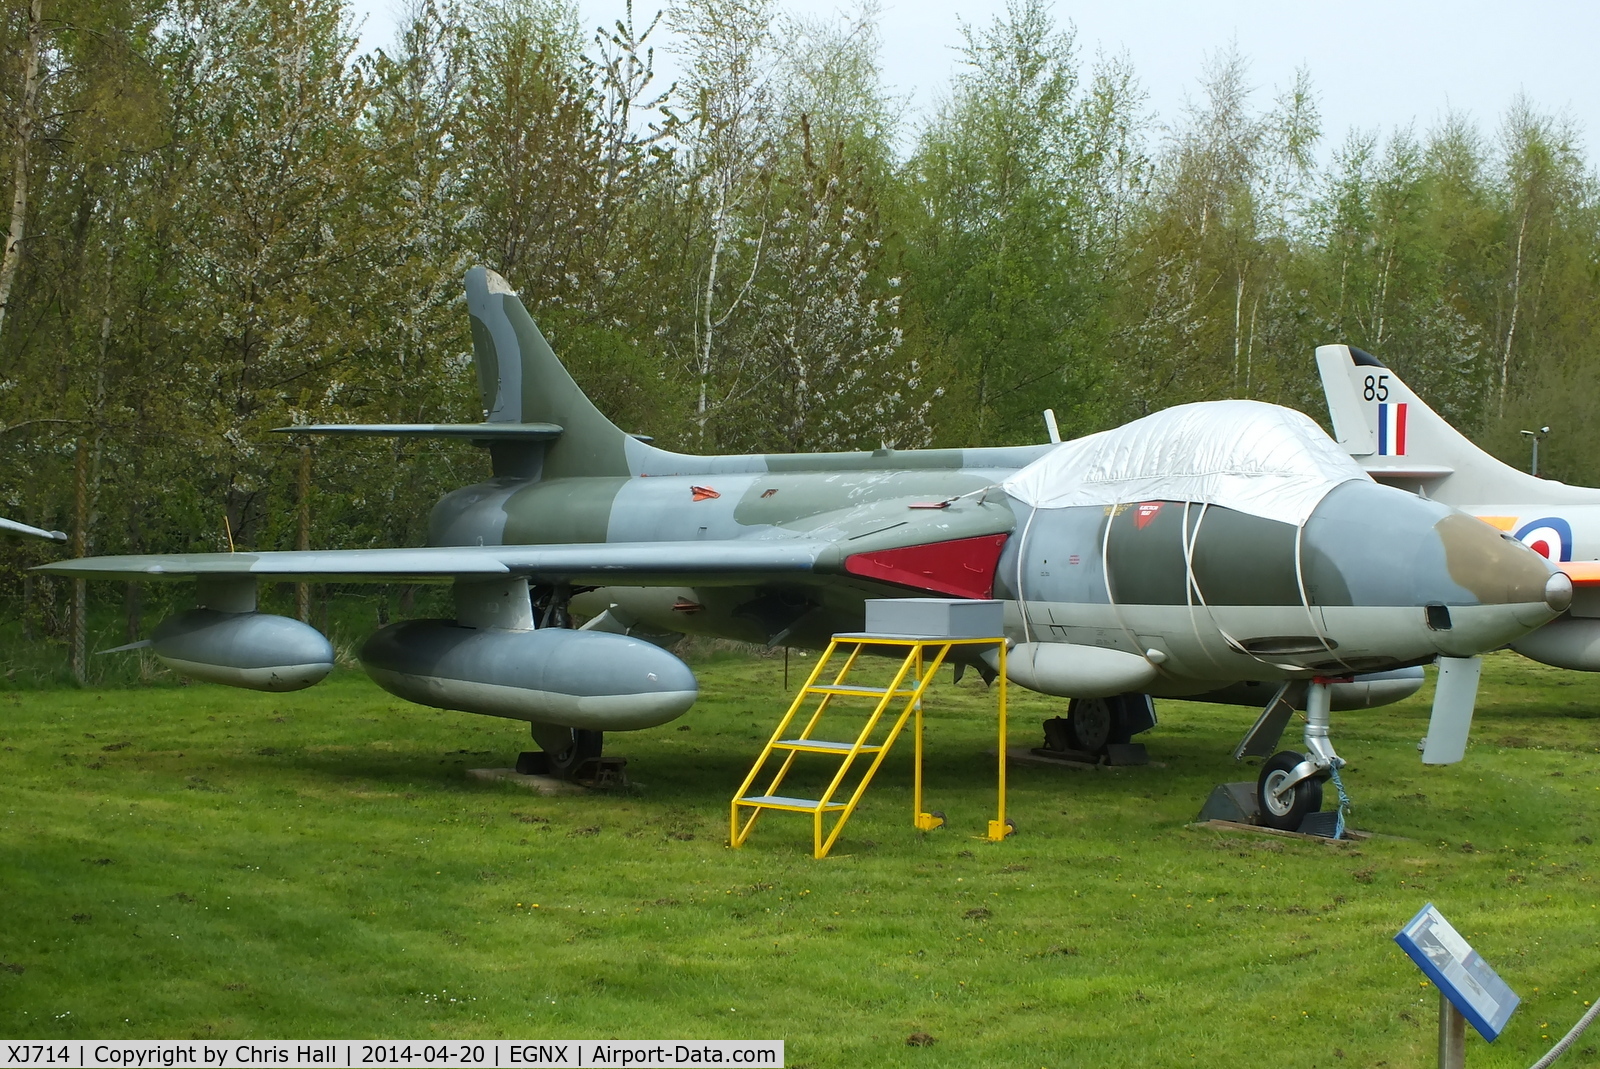 XJ714, 1957 Hawker Hunter FR.10 C/N 41H/688089, Composite airframe built from unwanted spares from WT684, XF383, XM126, XG226, PH-NLH & ET-272, Preserved at the East Midlands Aeropark